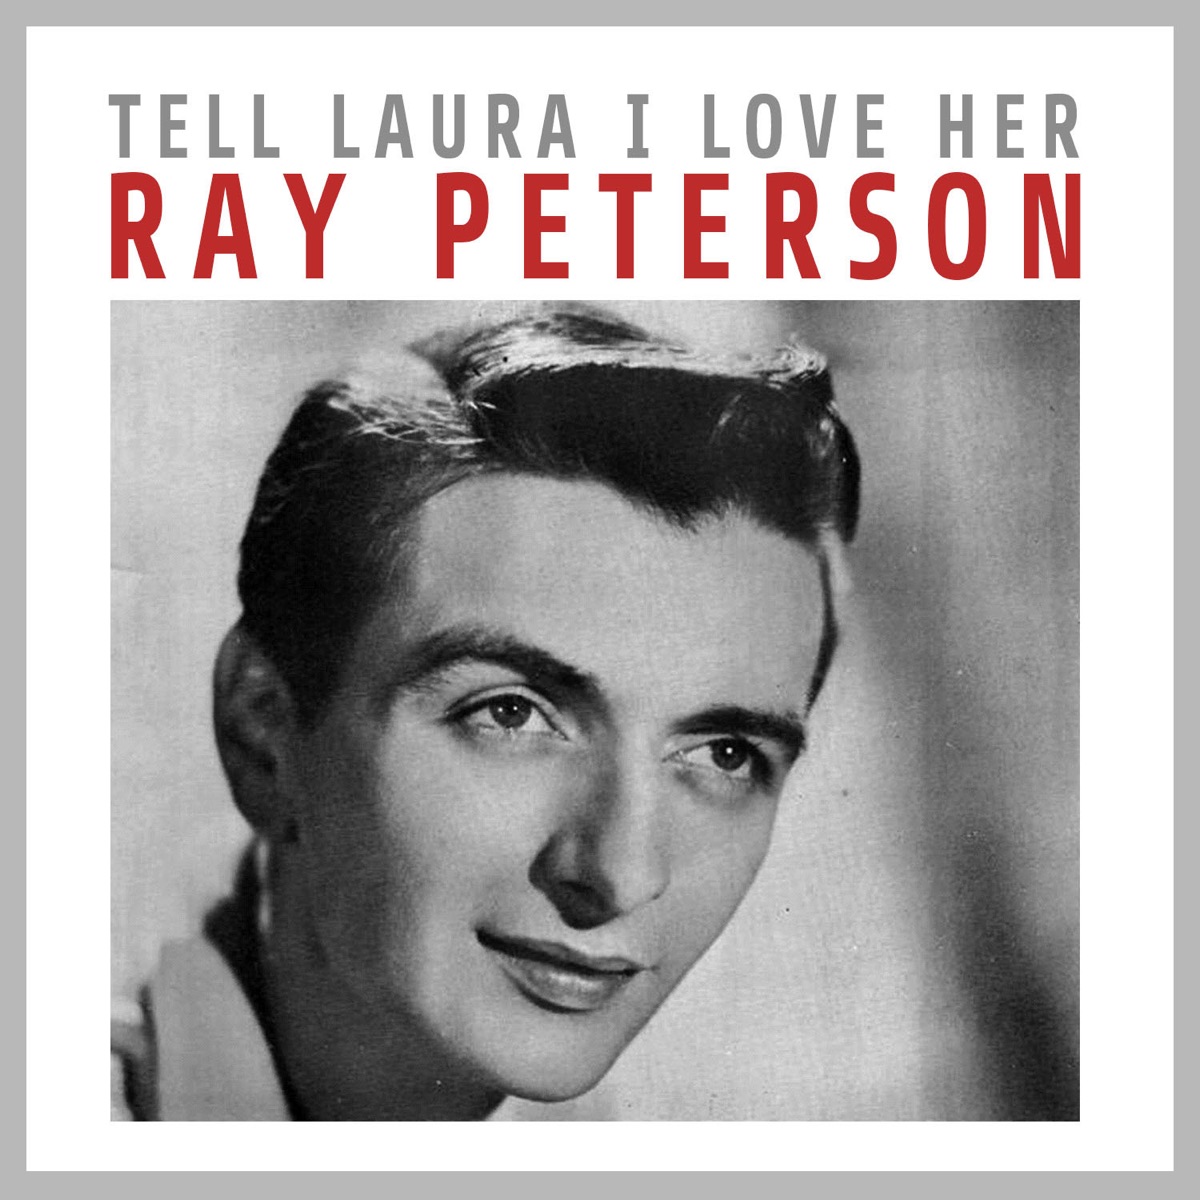 Tell Laura I Love Her - Single - Album by Ray Peterson - Apple Music